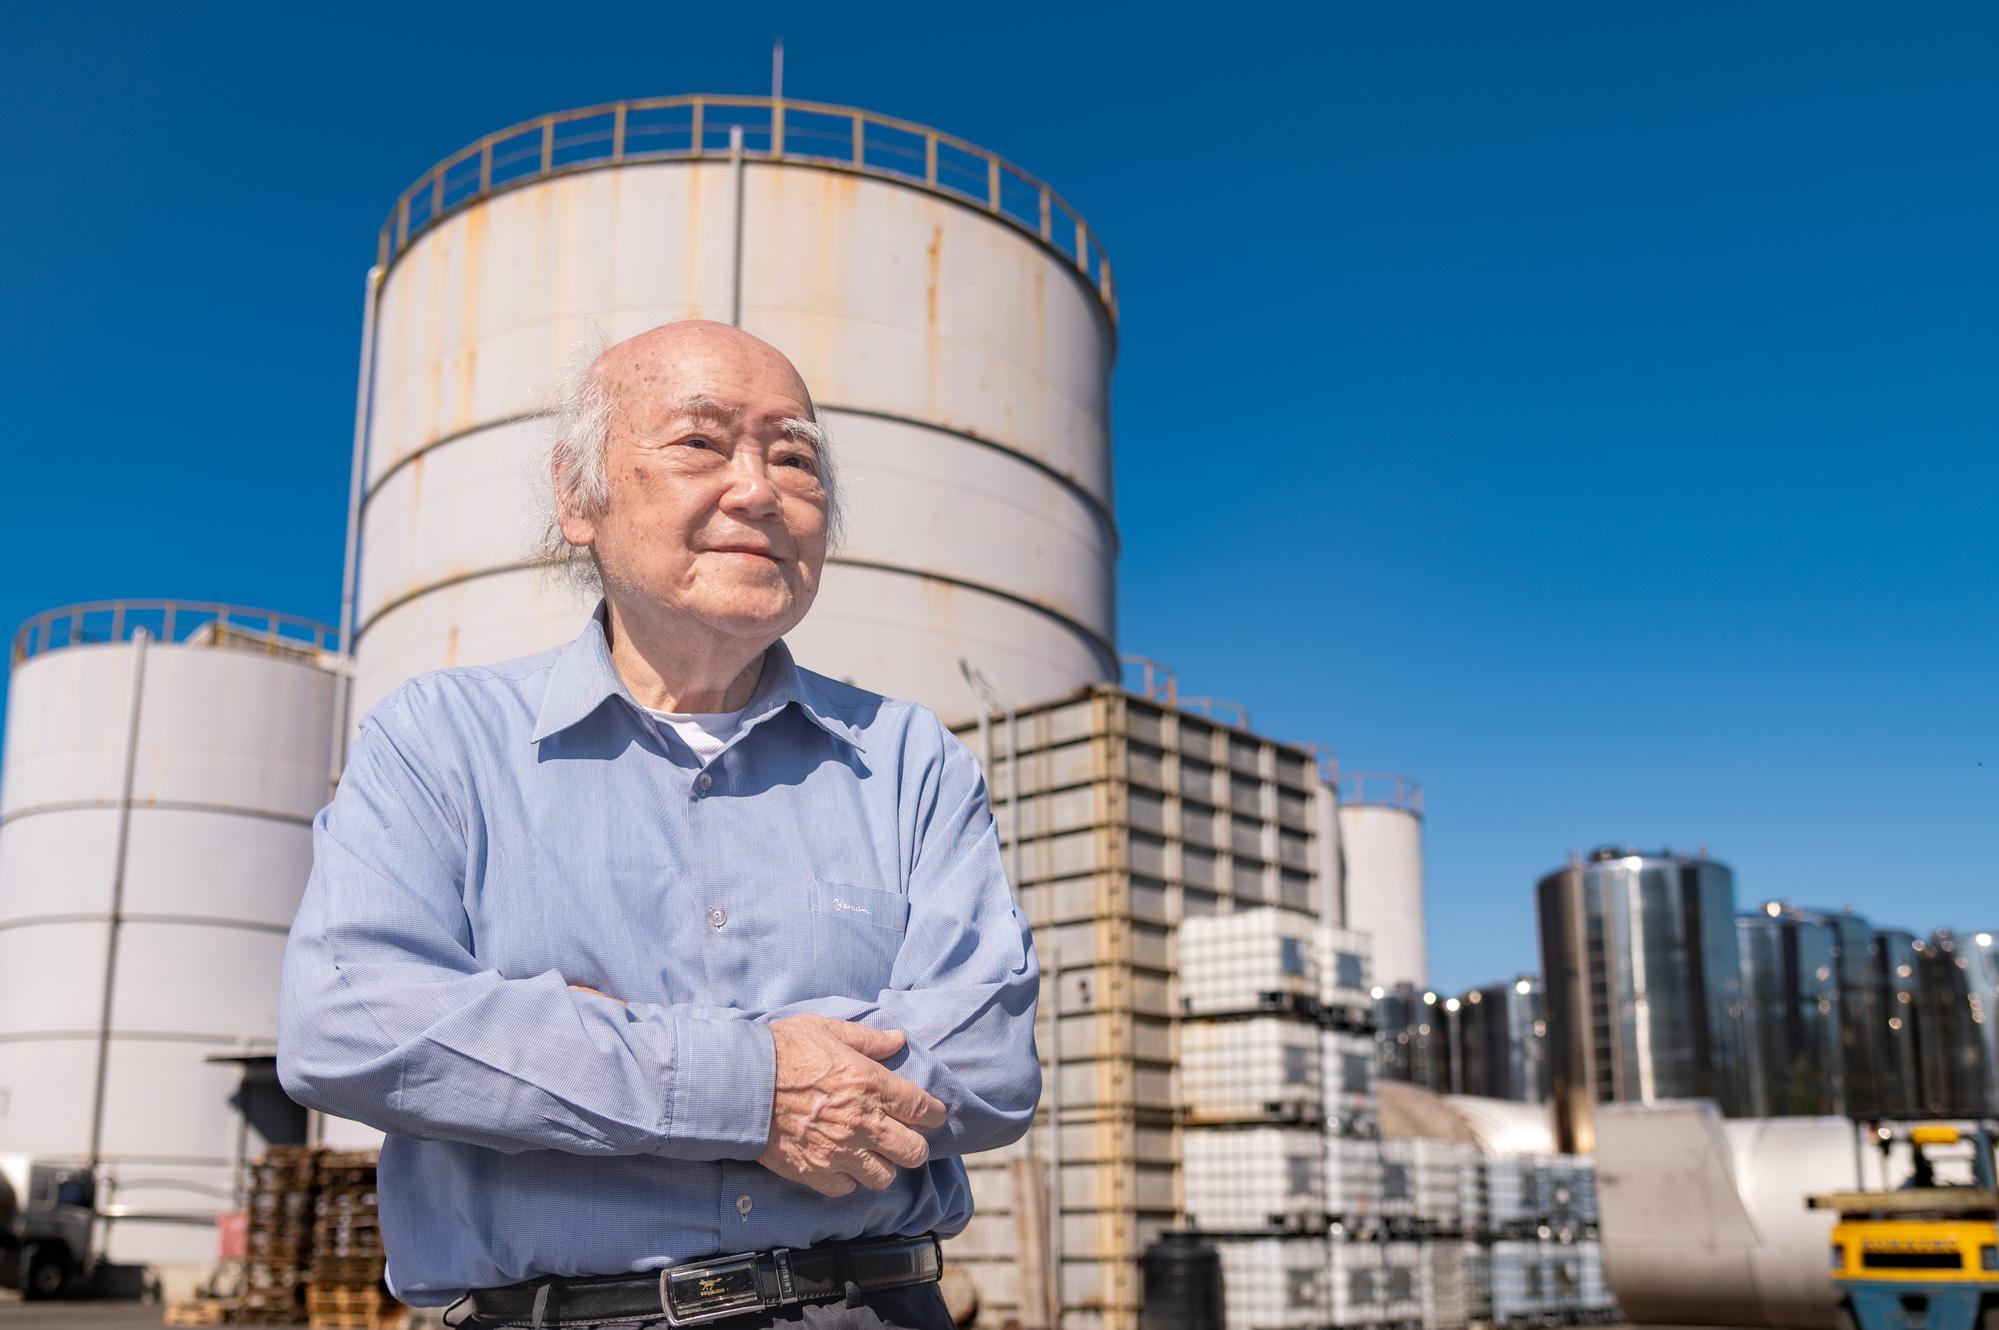 Chant Oil, founded by Dr. Yi-Fa Lee (李義發), is renowned for producing biodiesel worldwide.